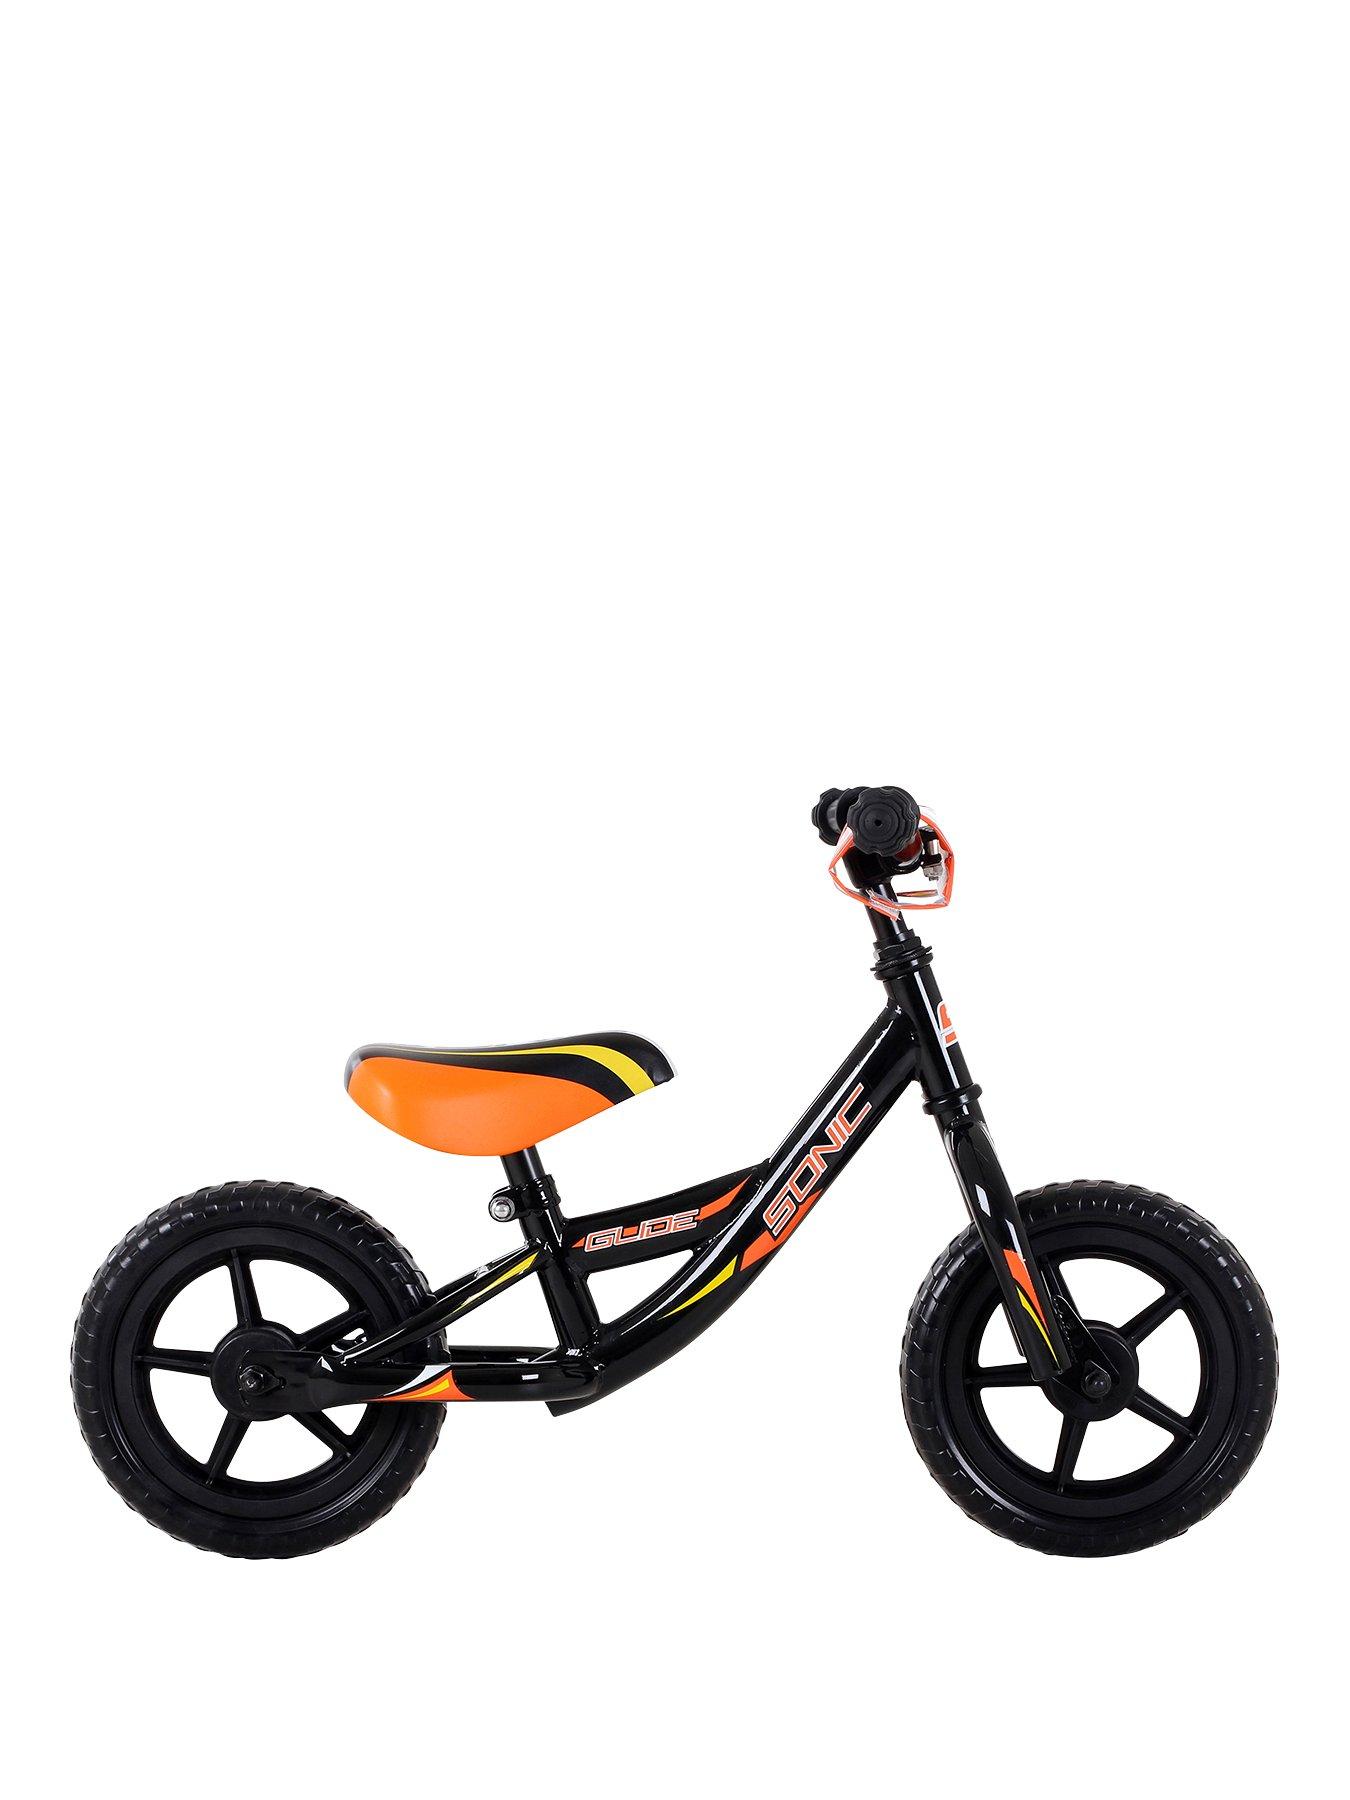 Motorcycle Style with Kettle Toddlers Street/Dirt Bikes No Battery HADST Kids Bike 12 with Training Wheels for 2 3 4 Year Old Boys Girls Childrens Freestyle Bicycles 